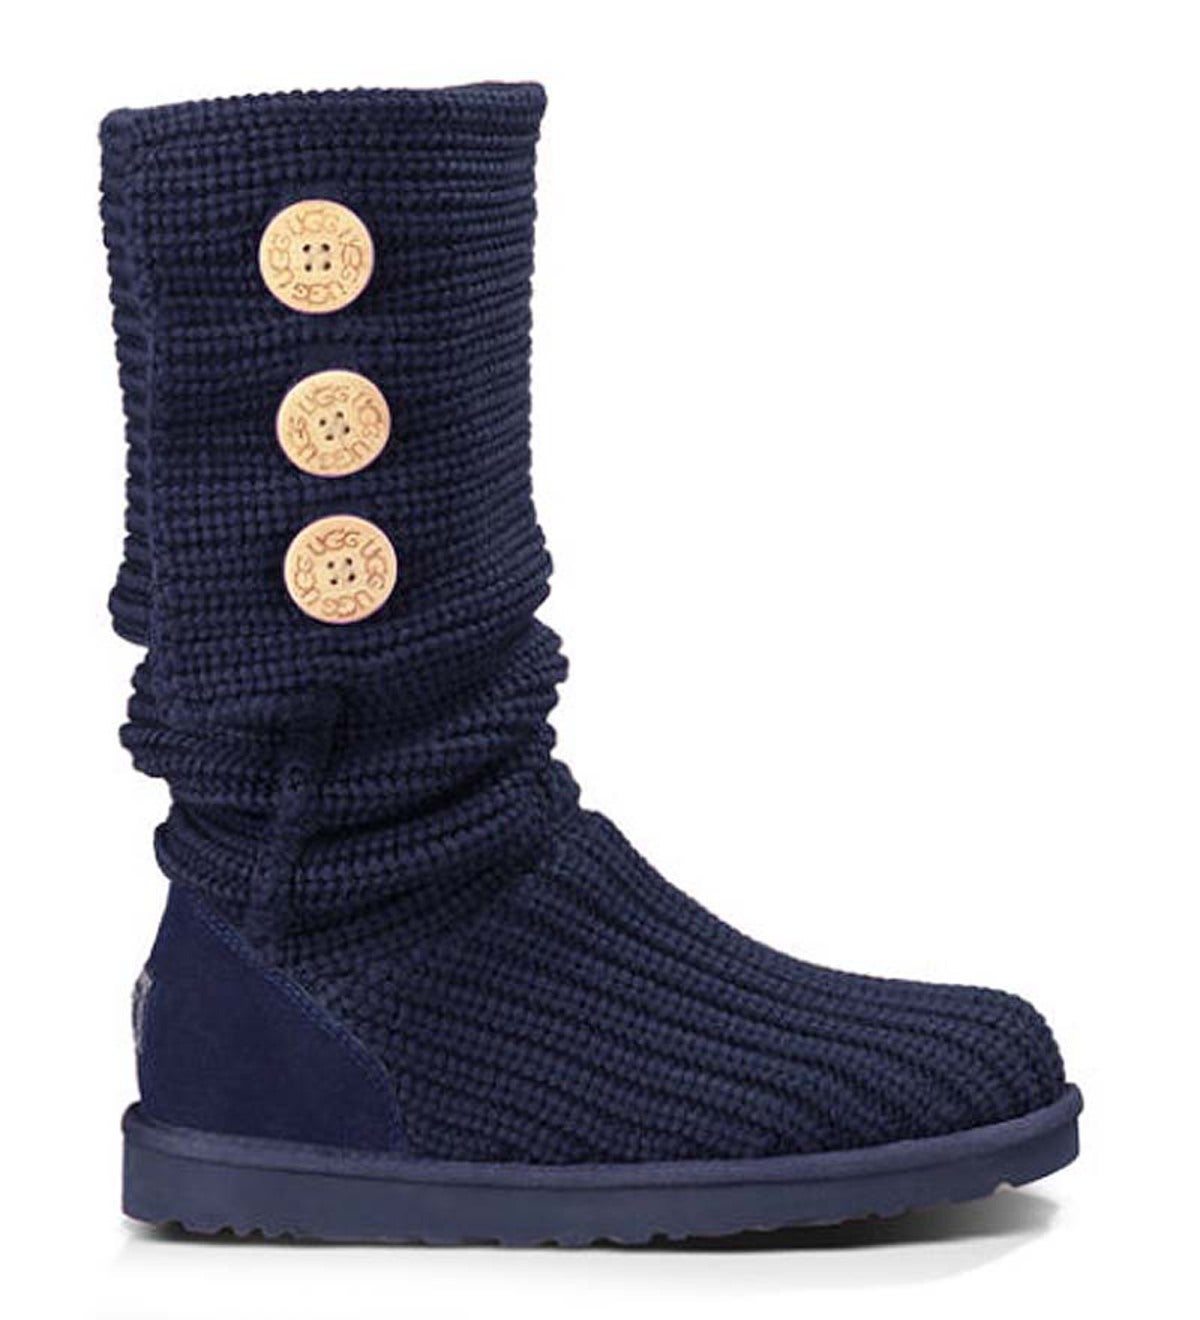 Sale! UGG® Australia Women's Soft-Knit Cardy Boot with Button Accents ...